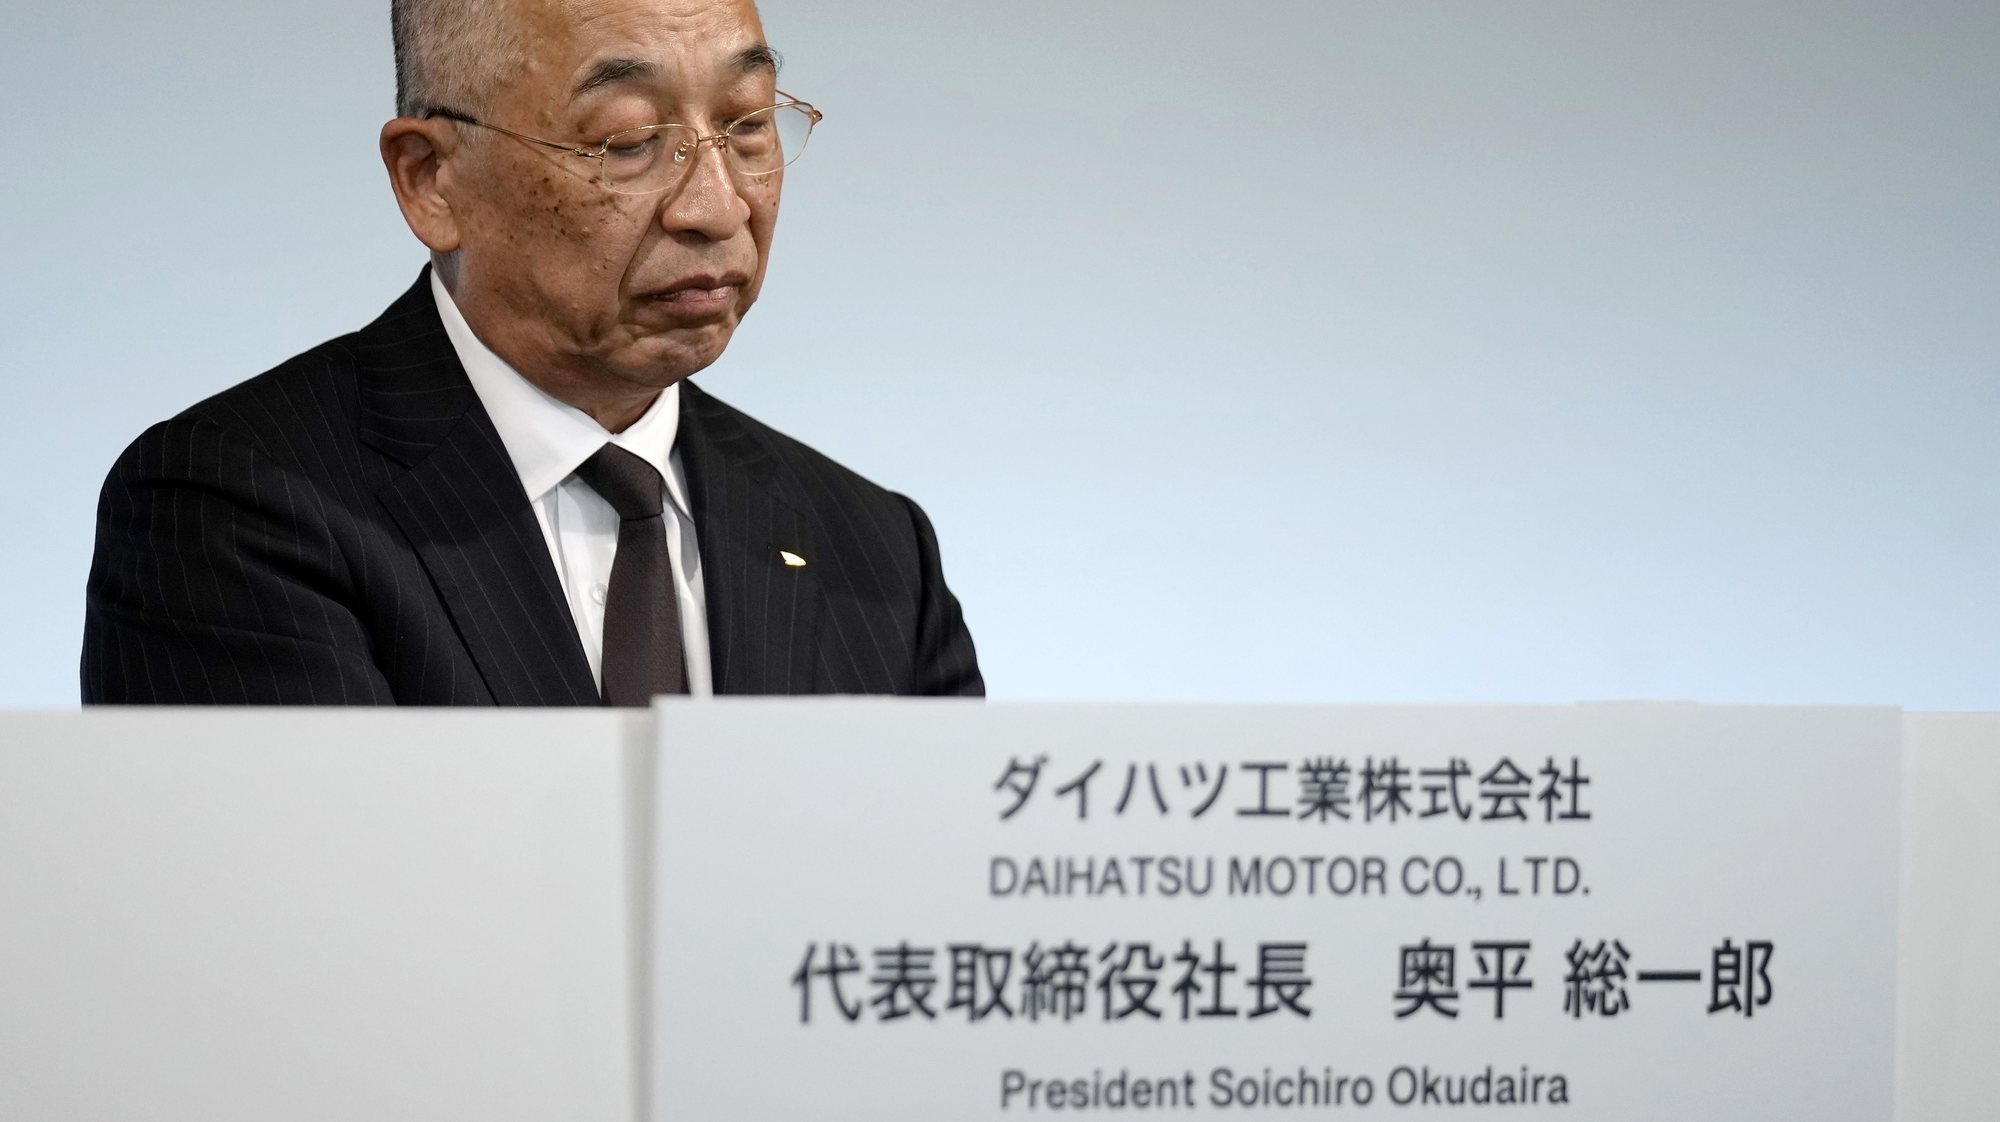 epa11038165 Daihatsu Motor Co. president, Soichiro Okudaira, attends a press conference in Tokyo, Japan, 20 December 2023. On 20 December, an independent third-party committee regarding procedural irregularities reported that 174 new cases in 25 test items were found. As a result, Daihatsu decided to temporarily suspend shipment of all Daihatsu models currently in production, both in Japan and overseas.  EPA/FRANCK ROBICHON